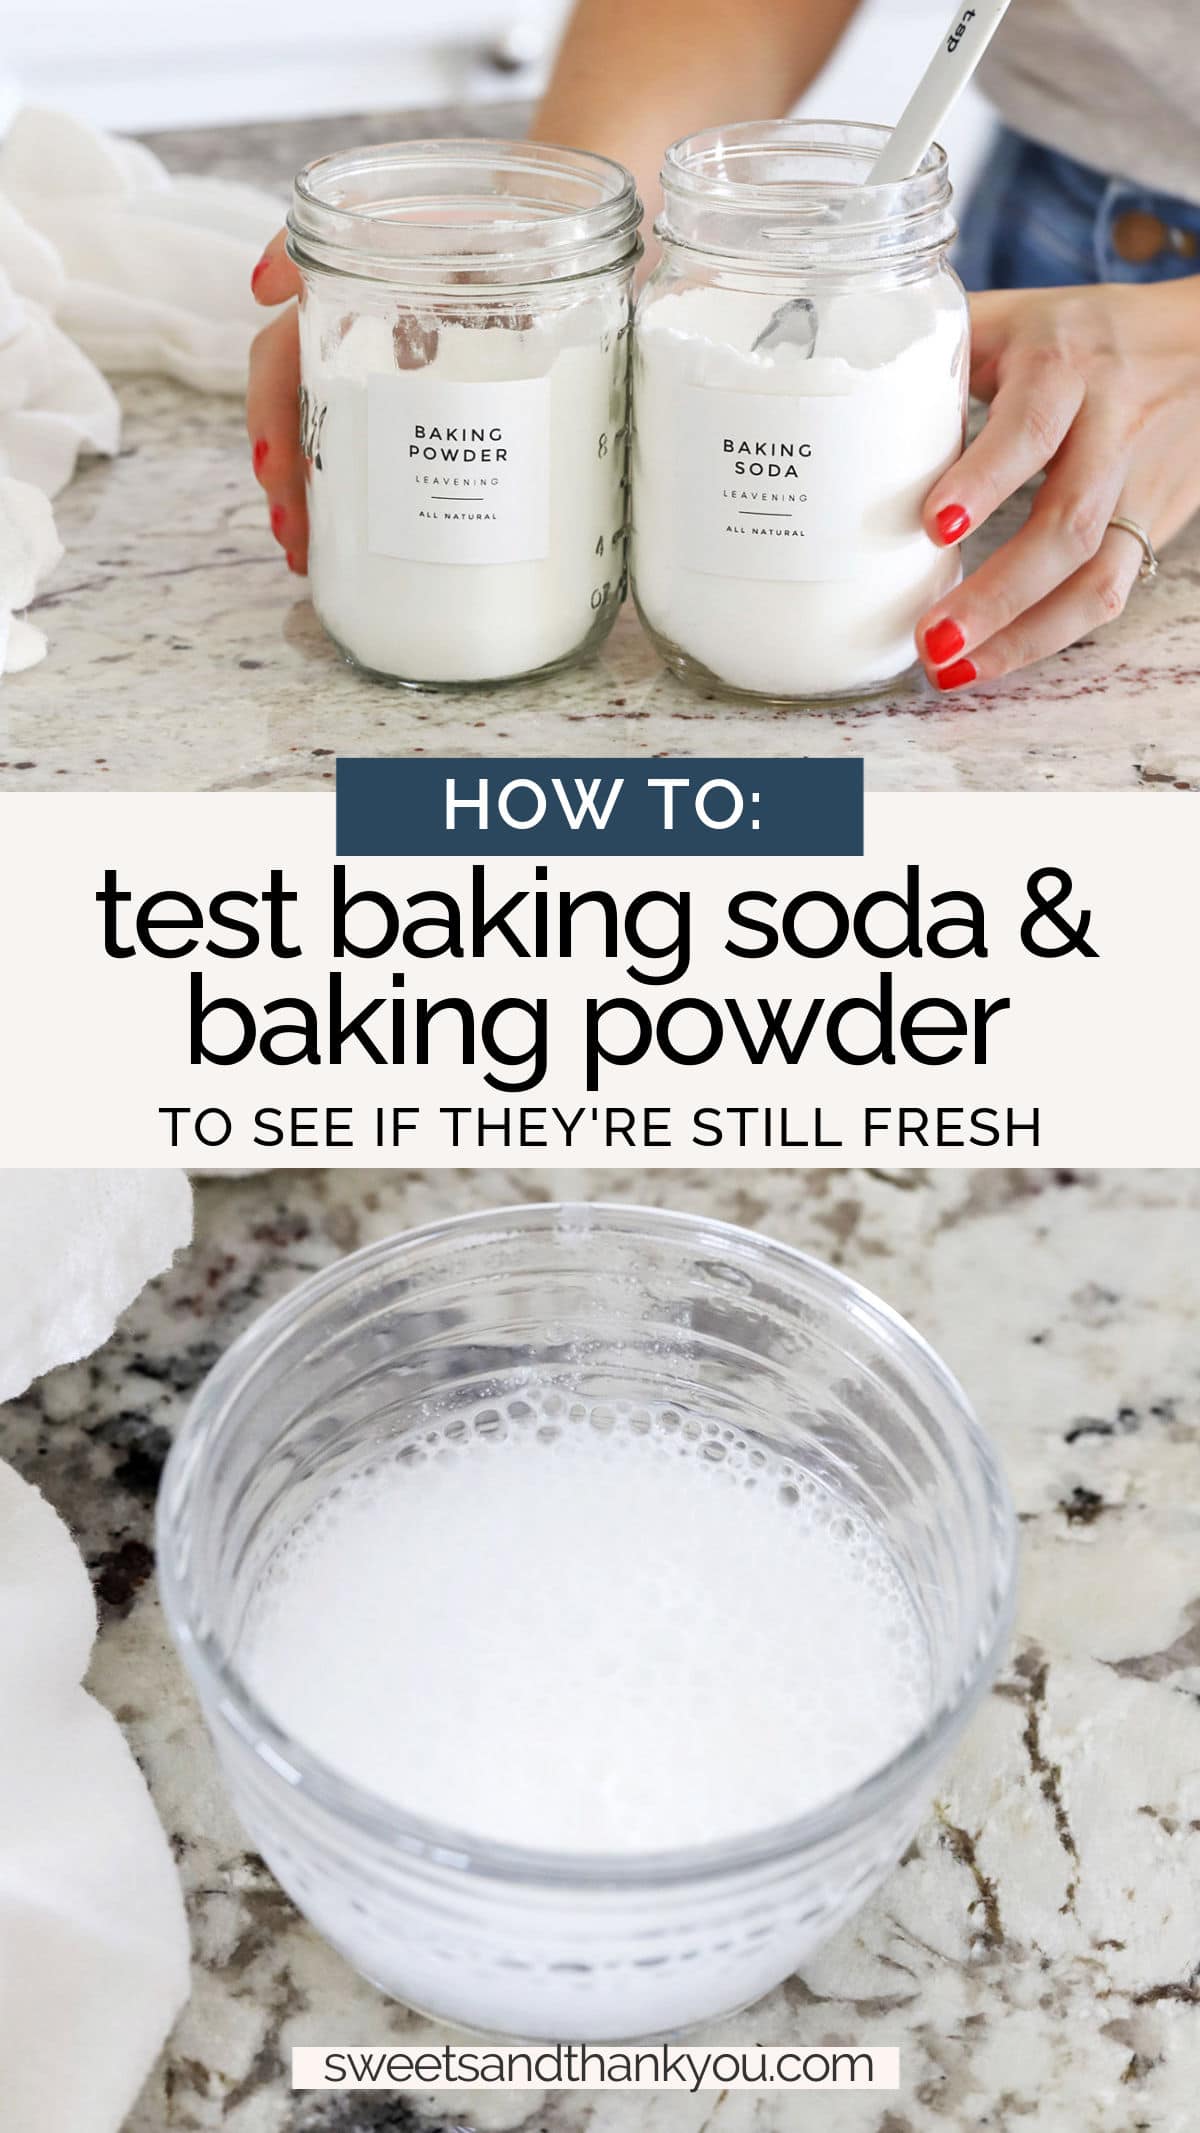 Ever wondered if your baking powder or baking soda is still good? Check your baking soda & baking powder freshness with these quick tips! / how to tell if baking soda is fresh / how to tell if baking powder is fresh / how long does baking soda last after opening / how long does baking powder last after opening / baking powder substitution / how to test baking soda / how to test baking powder / what's the difference between baking powder and baking soda / how to tell if baking powder is bad